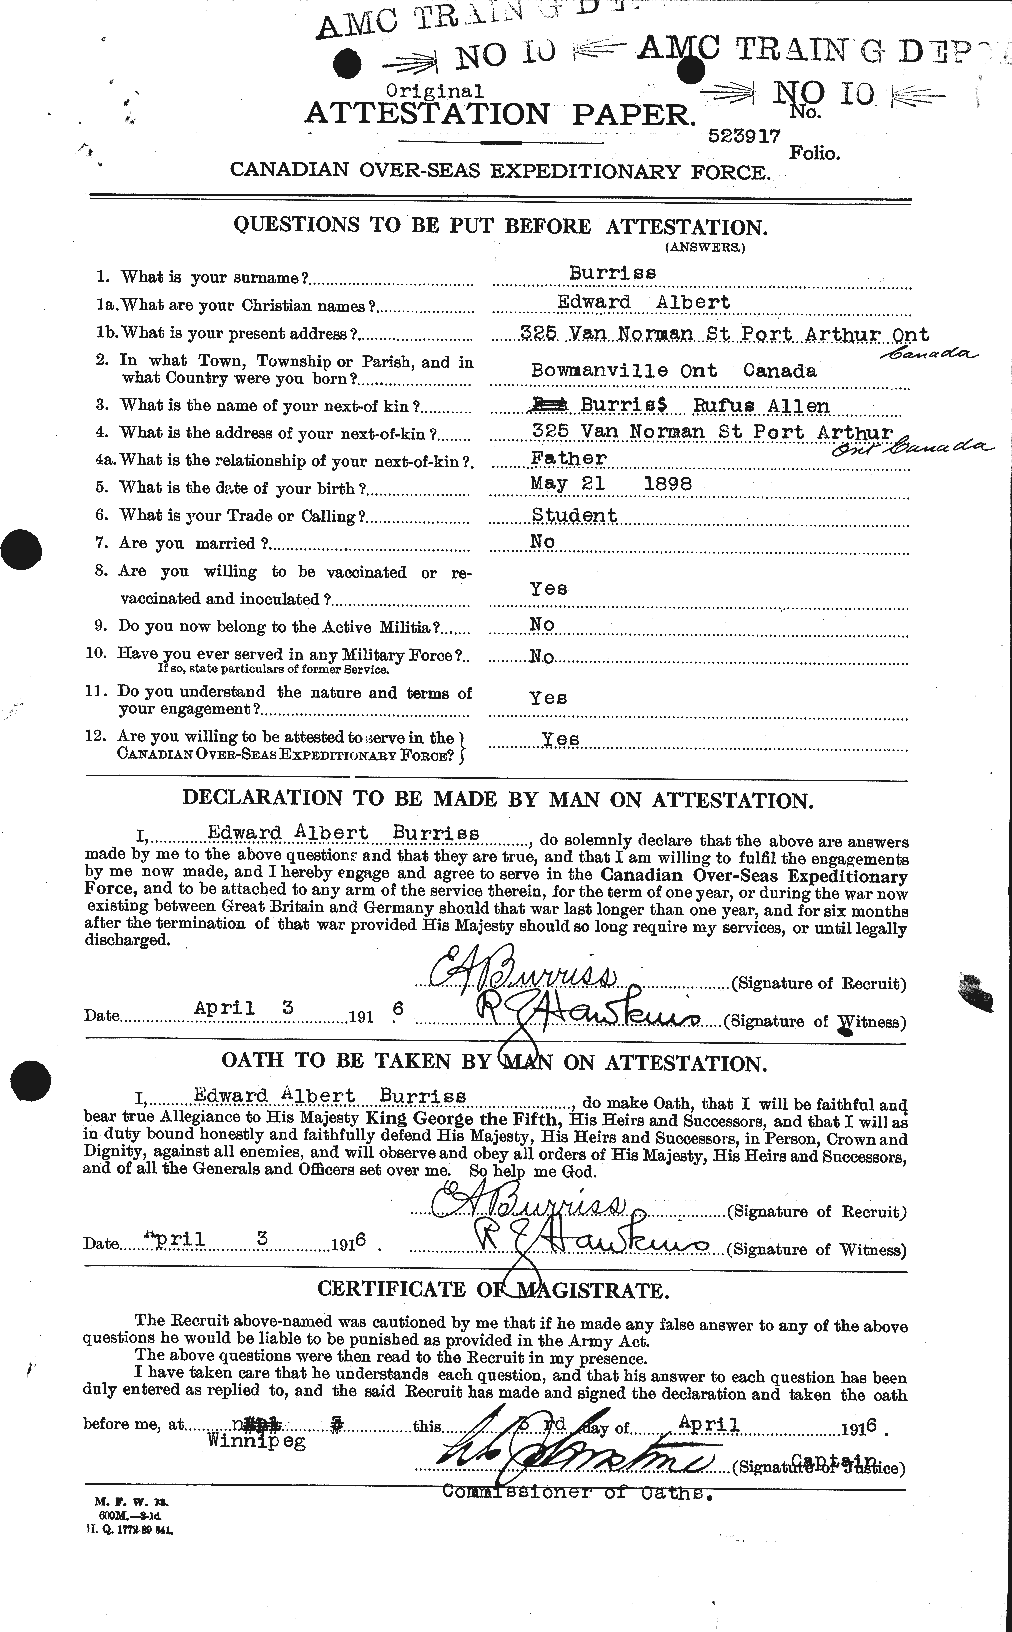 Personnel Records of the First World War - CEF 274696a